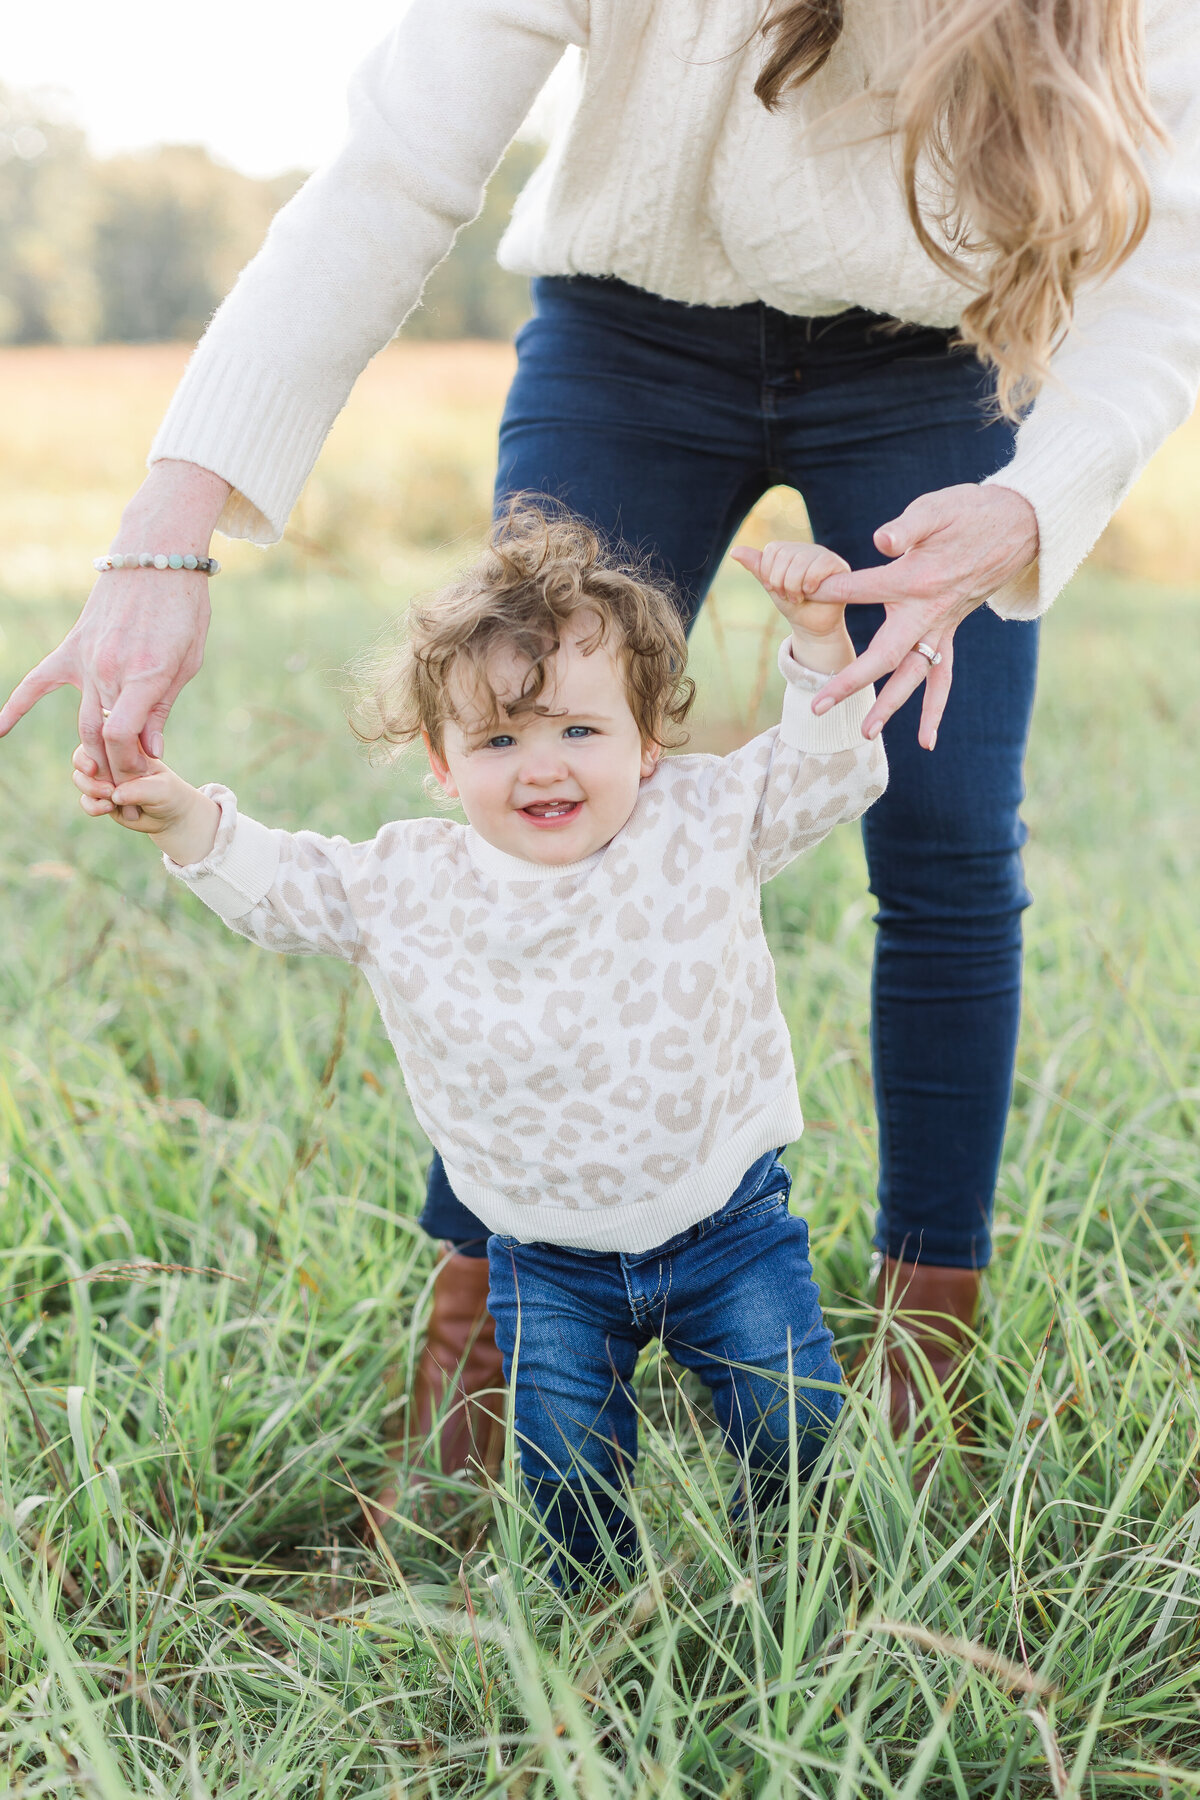 A northern virginia family photographer photo of a mother helping her daughter walk through the grass while smiling at the camera